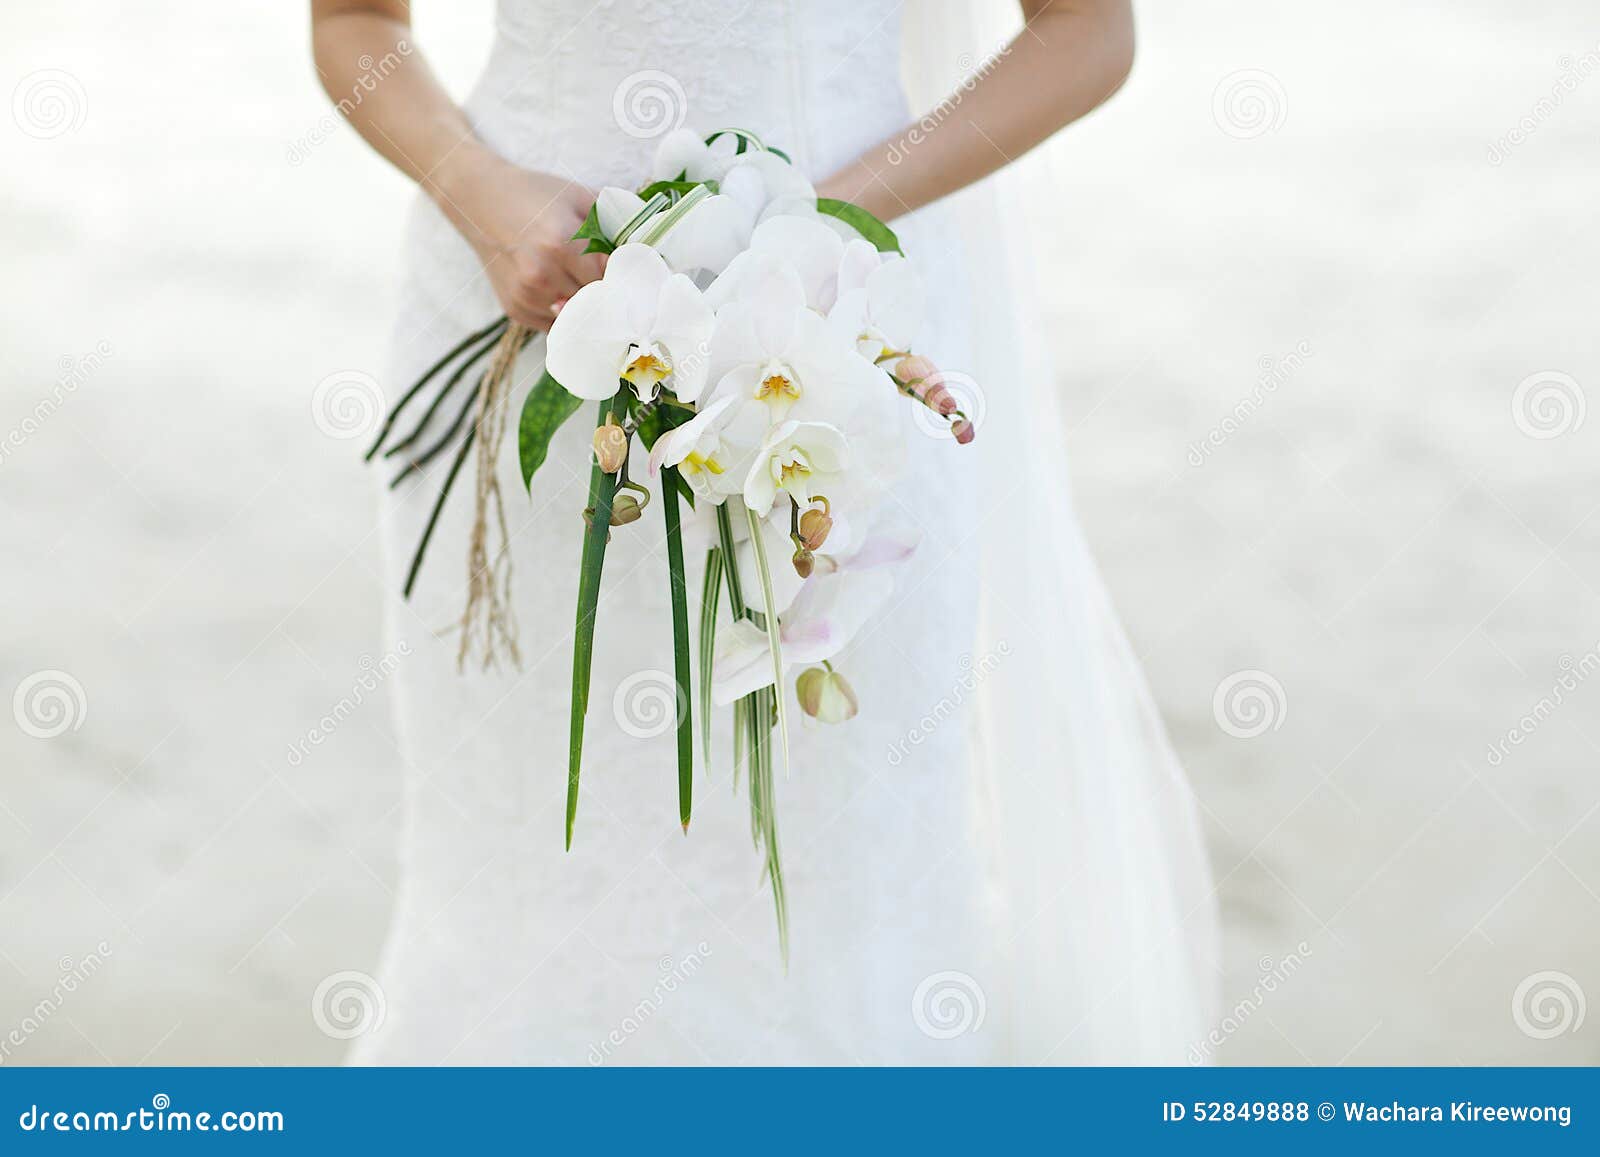 woman holding white orchid wedding bouquet beach background young 52849888